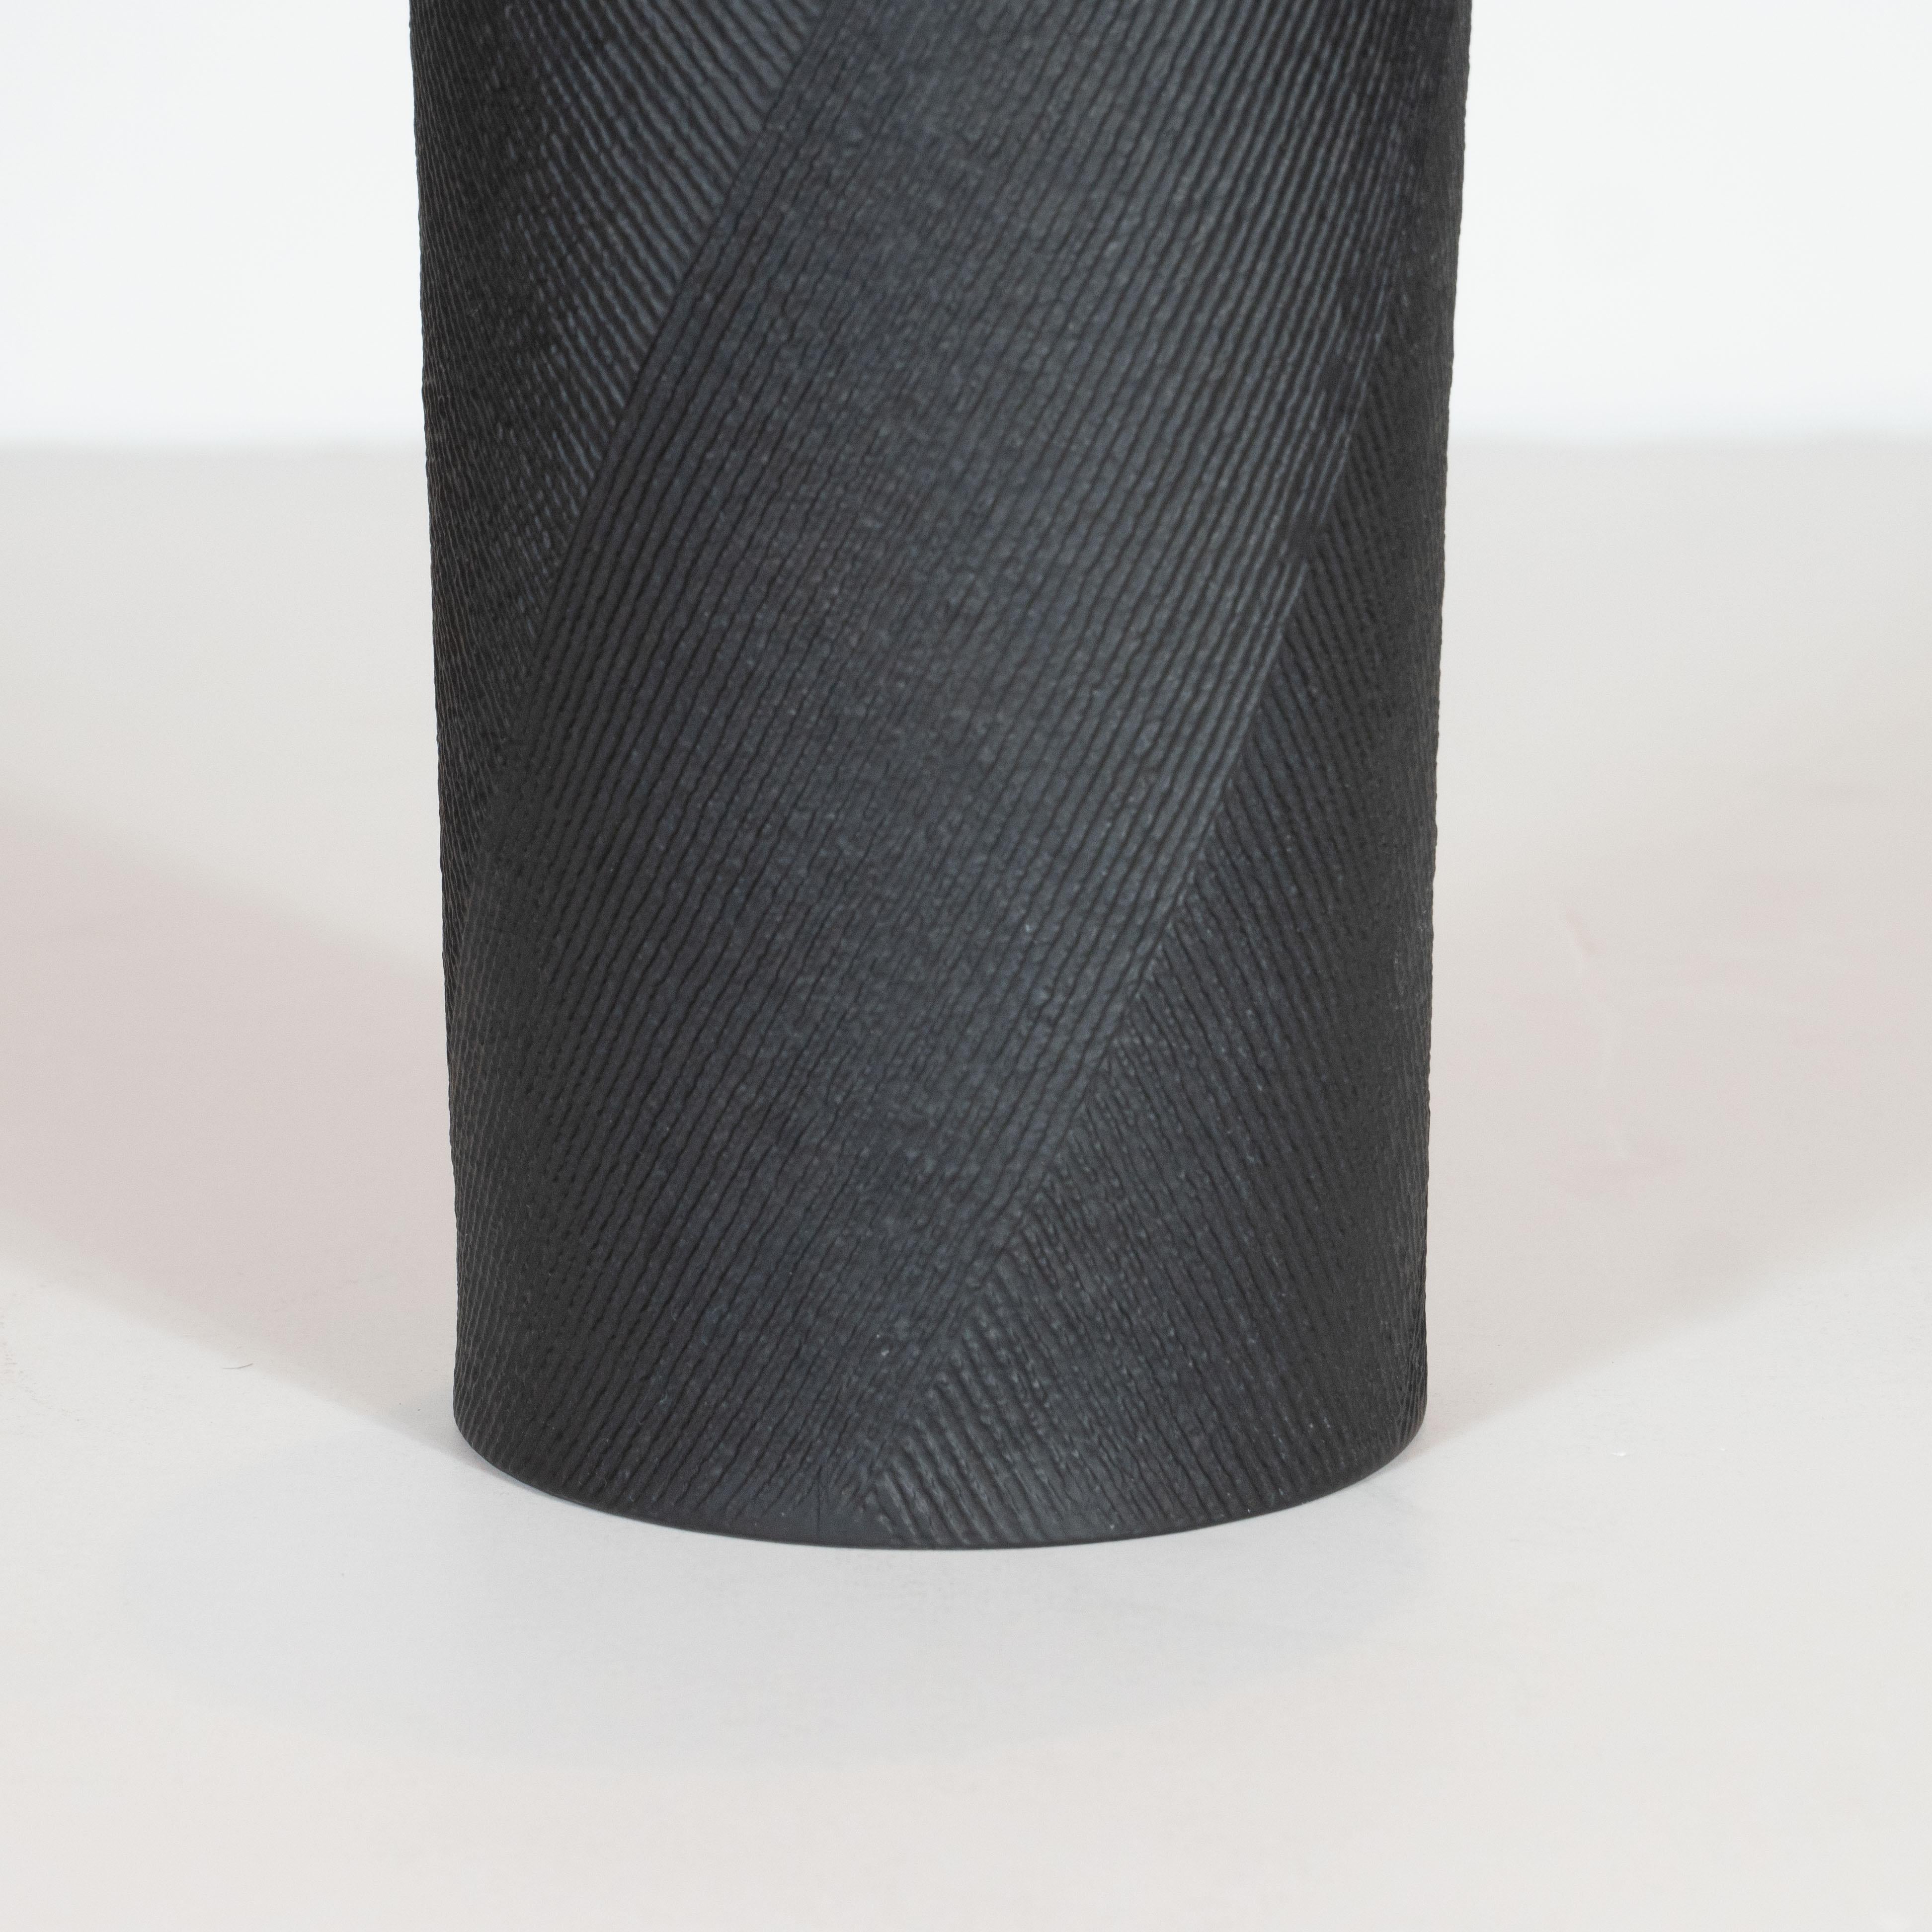 Late 20th Century Modernist Textured Black and Glazed Gold, Copper and Platinum Vase by Rosenthal